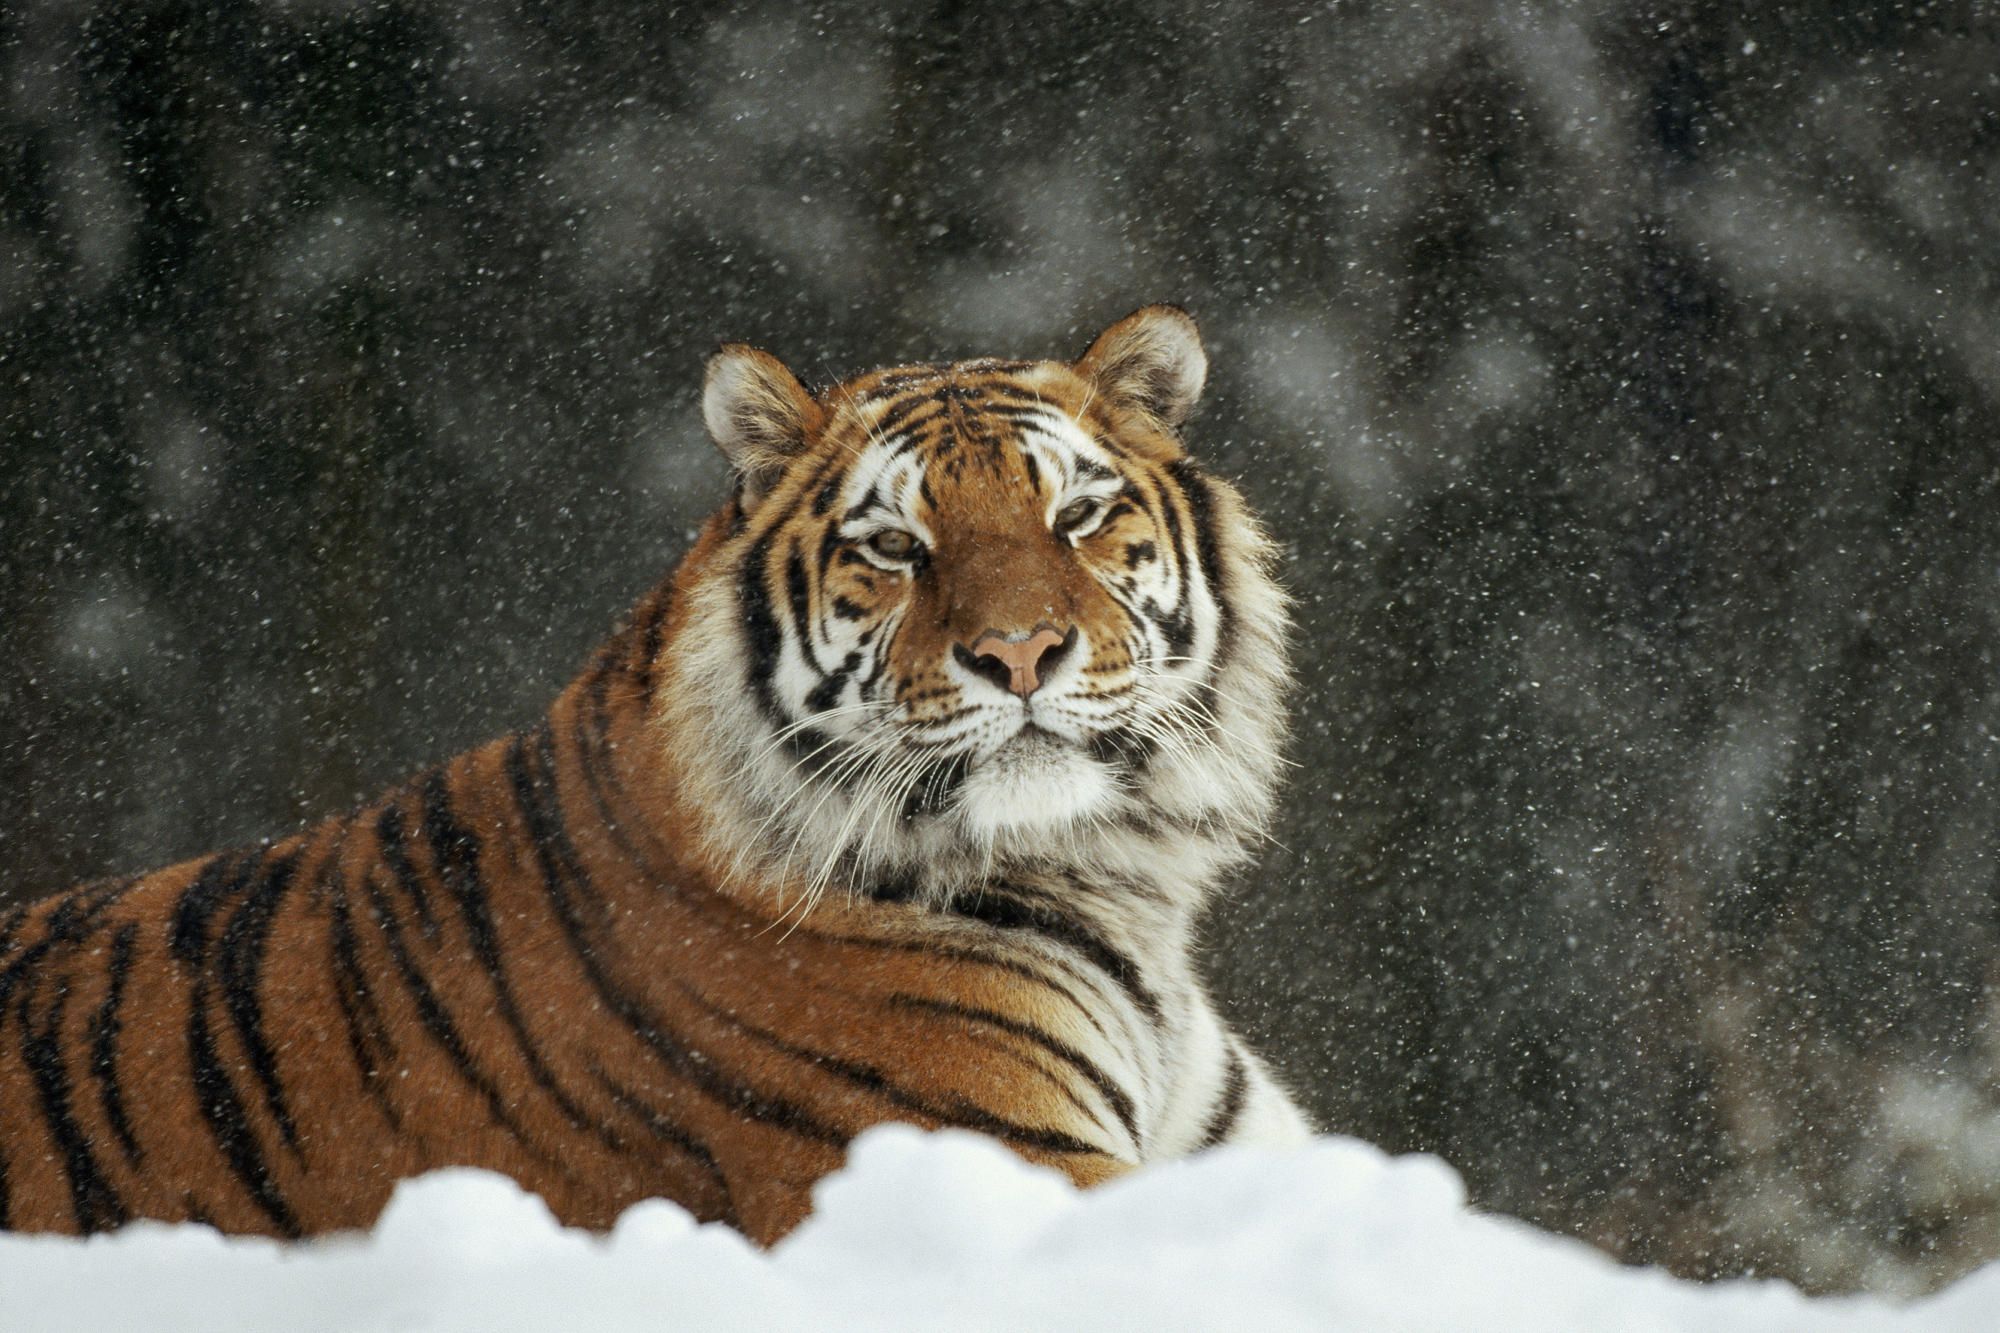 Animals snow tigers wallpaper - - High Quality and other